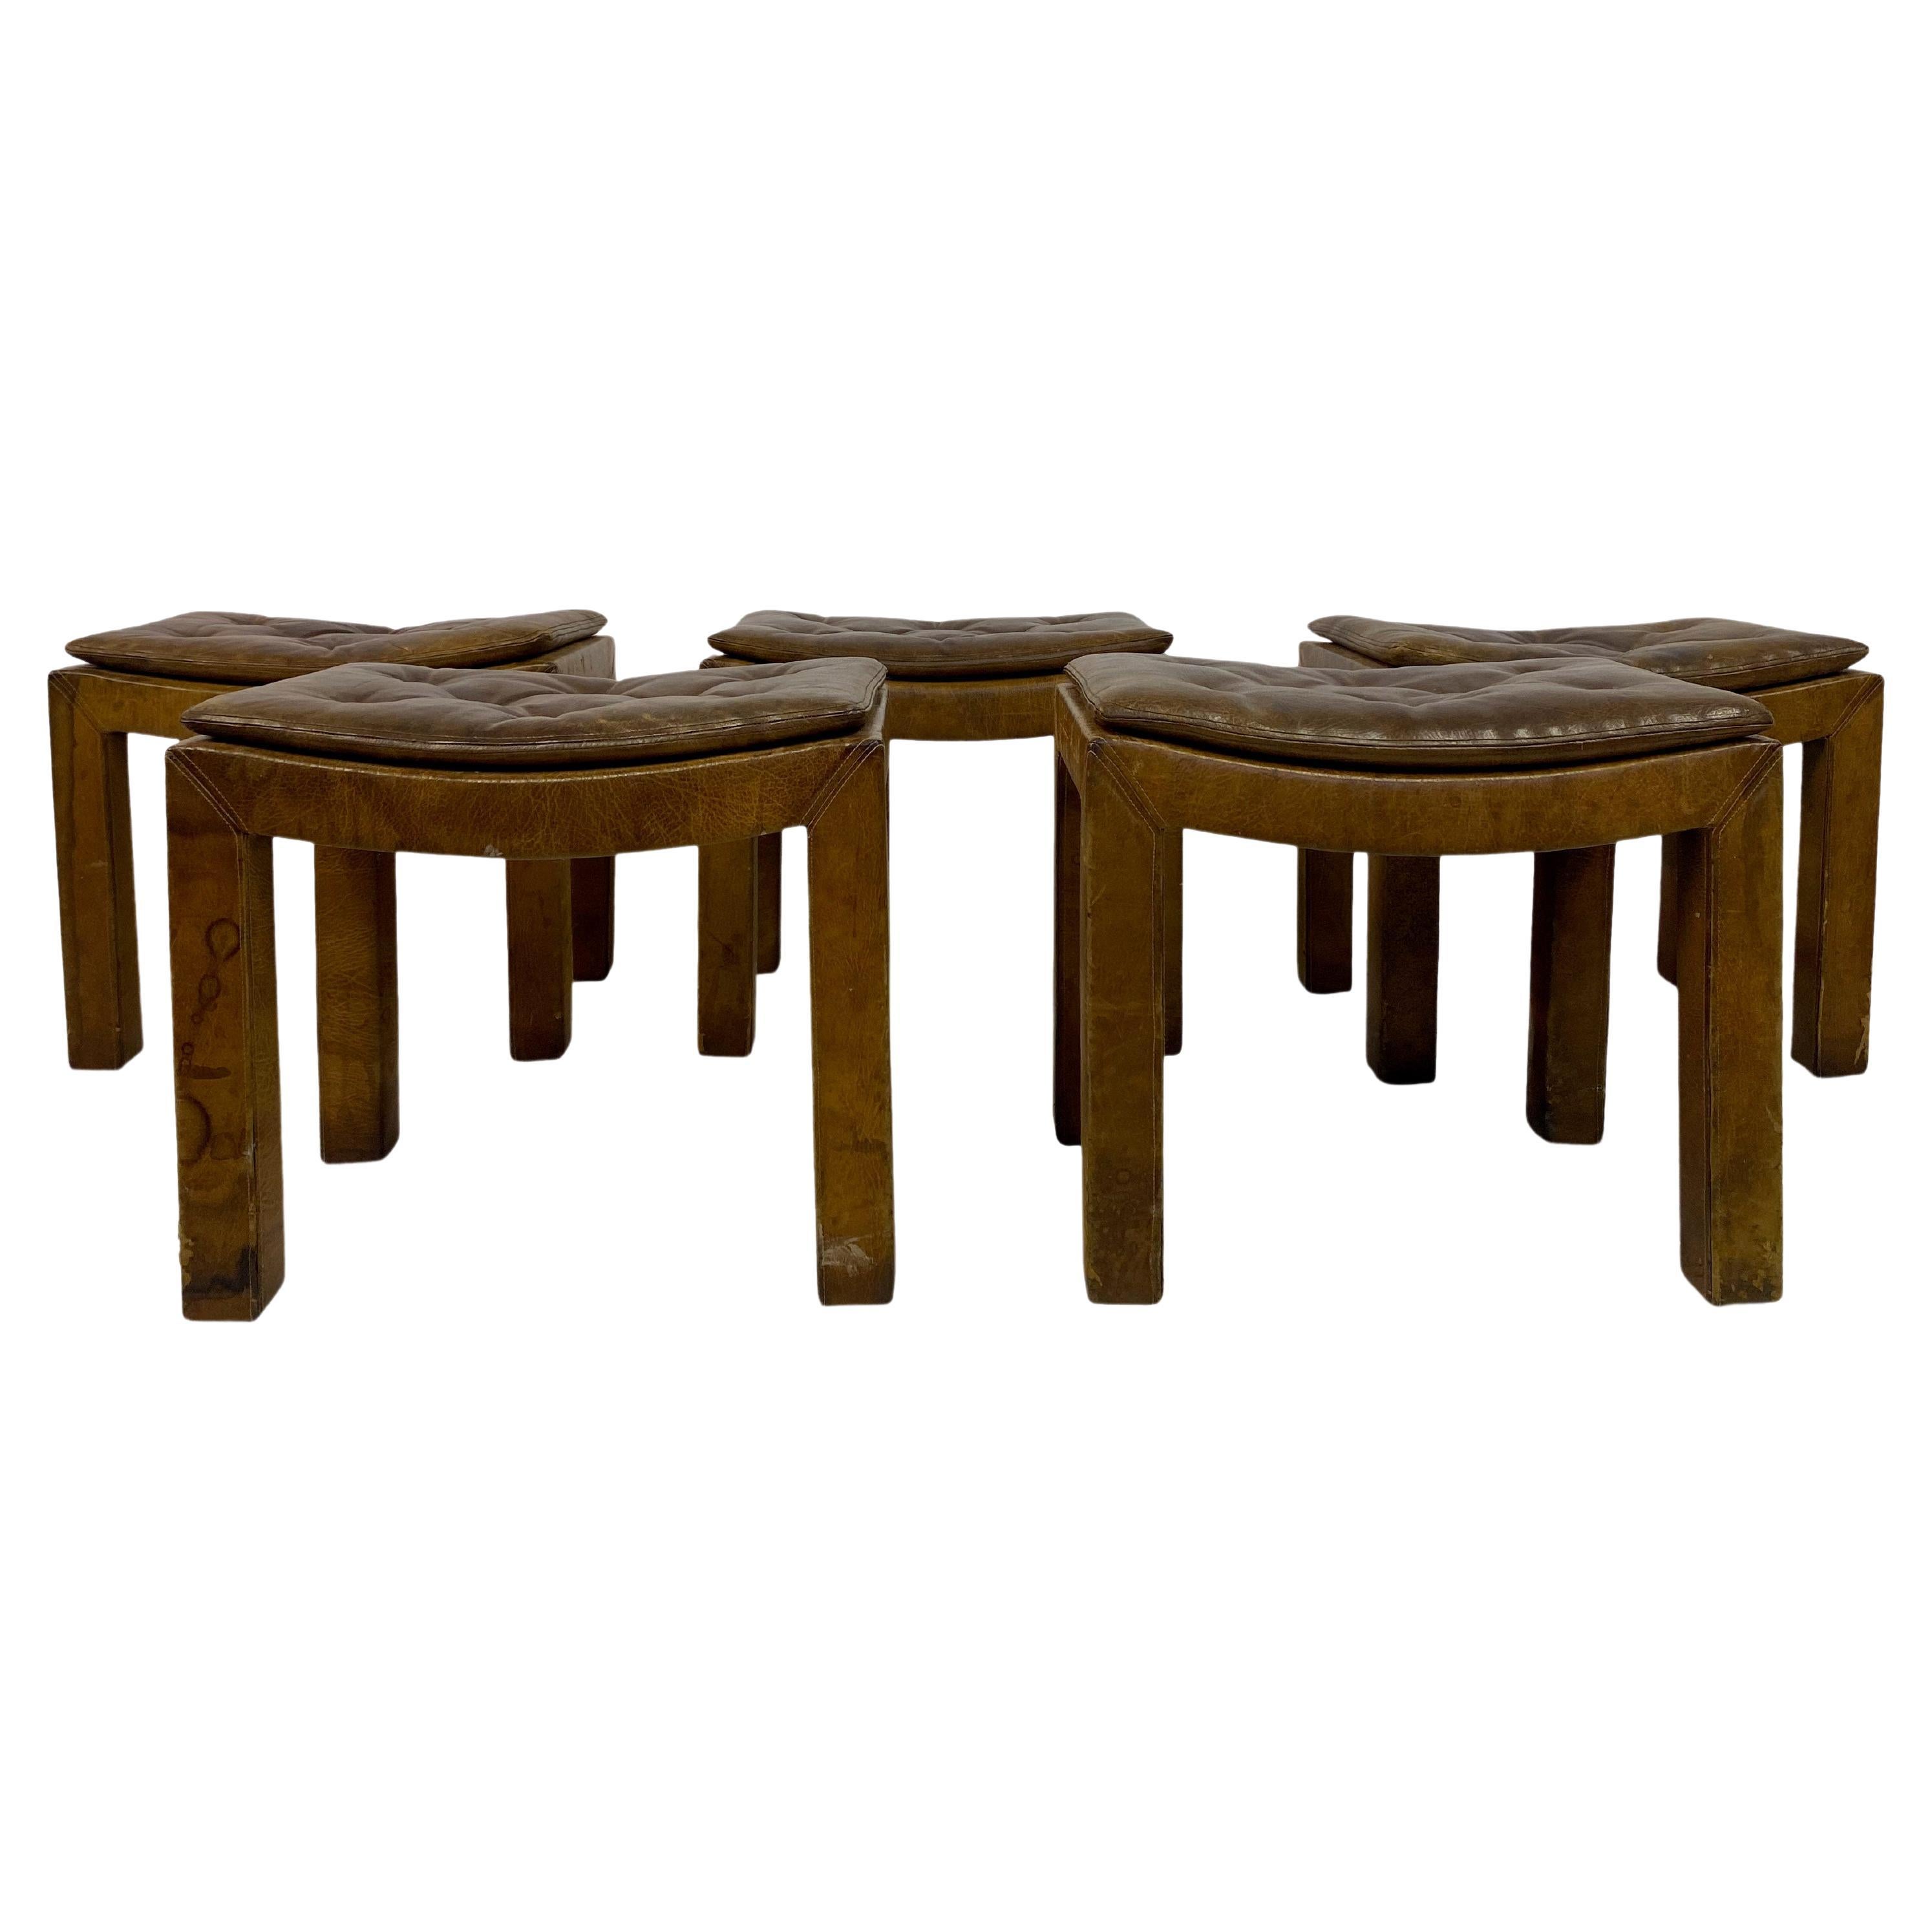 Set of Five Buttoned Leather Stools